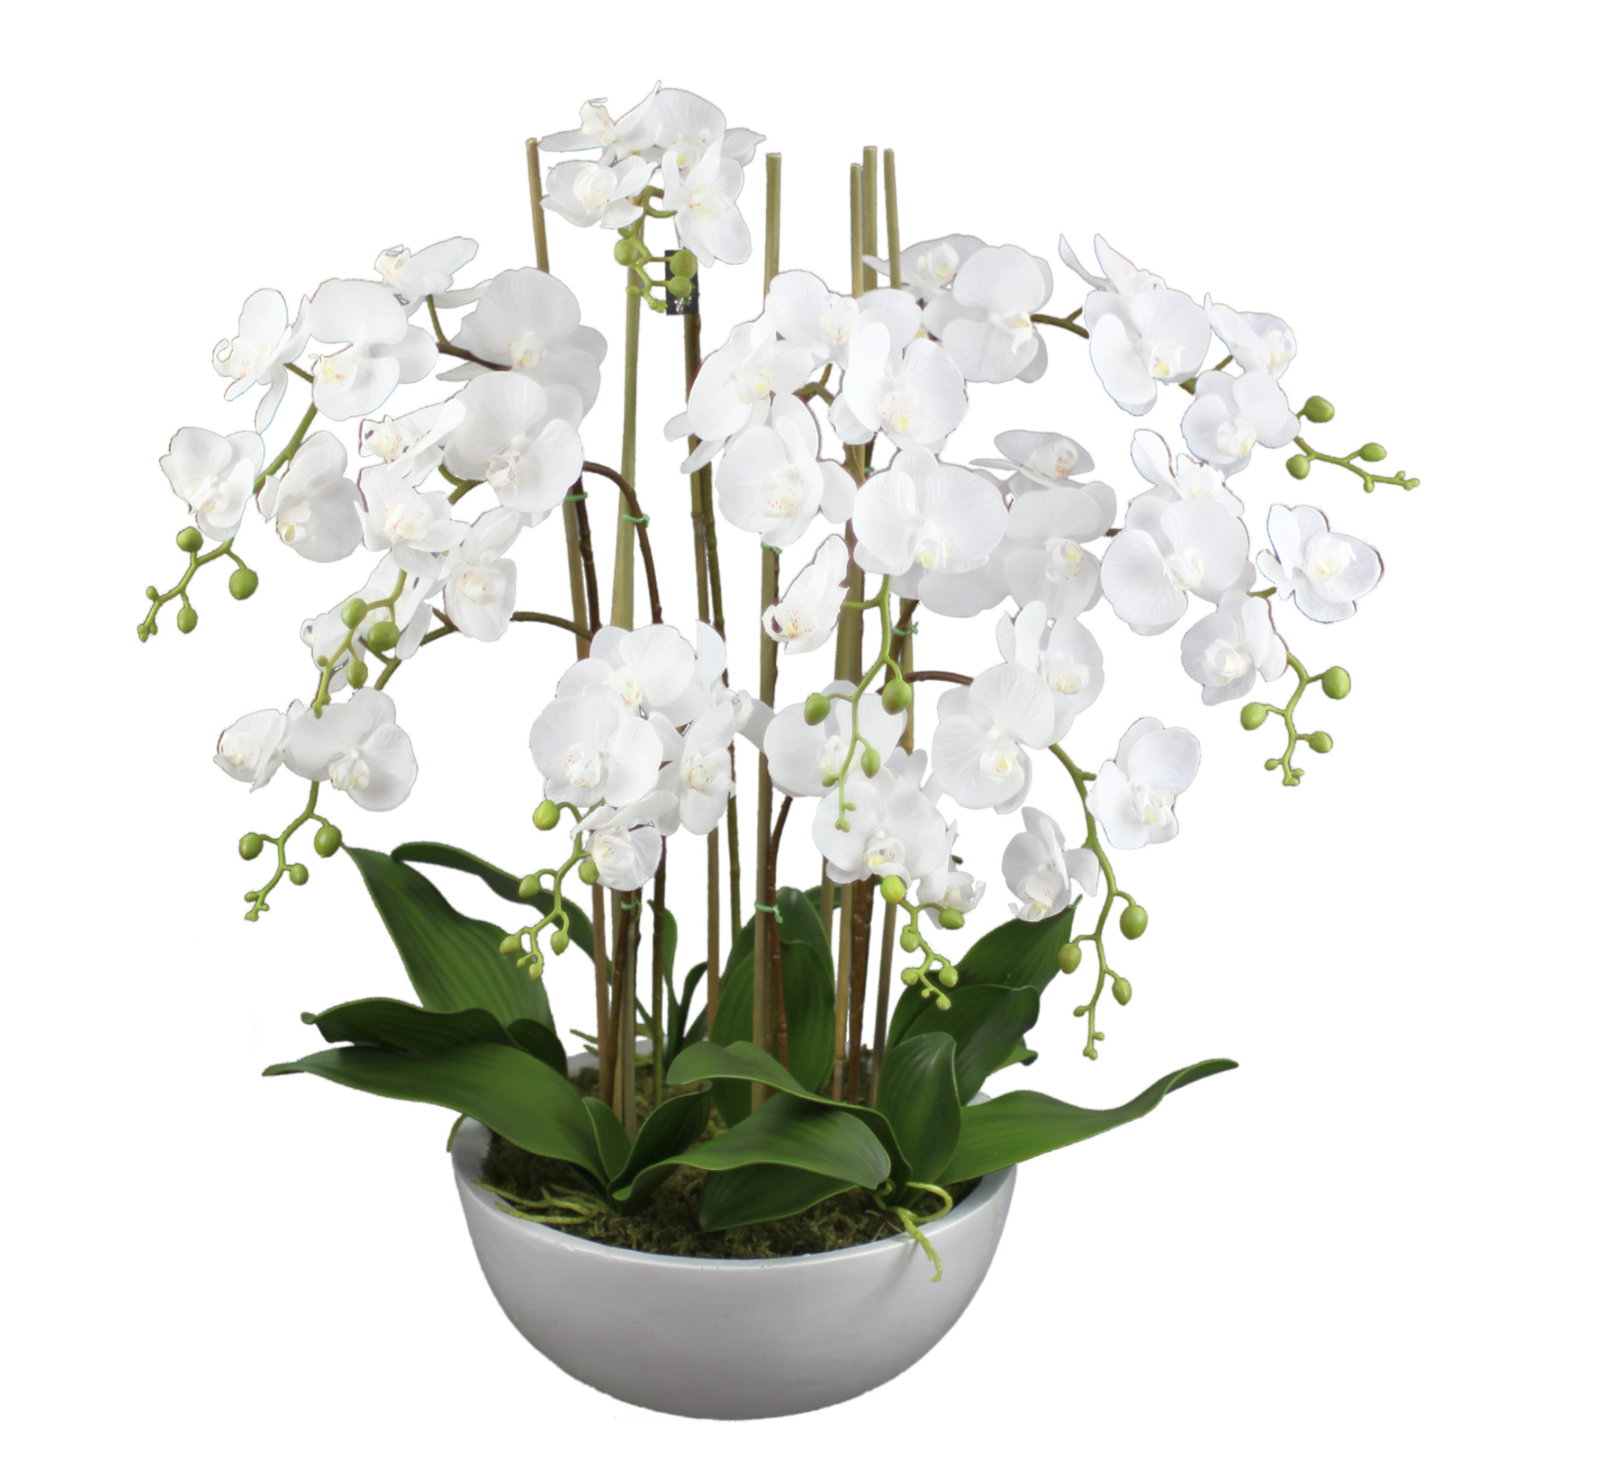 75cm Large Faux Phal Orchid with Ceramic Pot Artificial Plant Flower Tree Fake